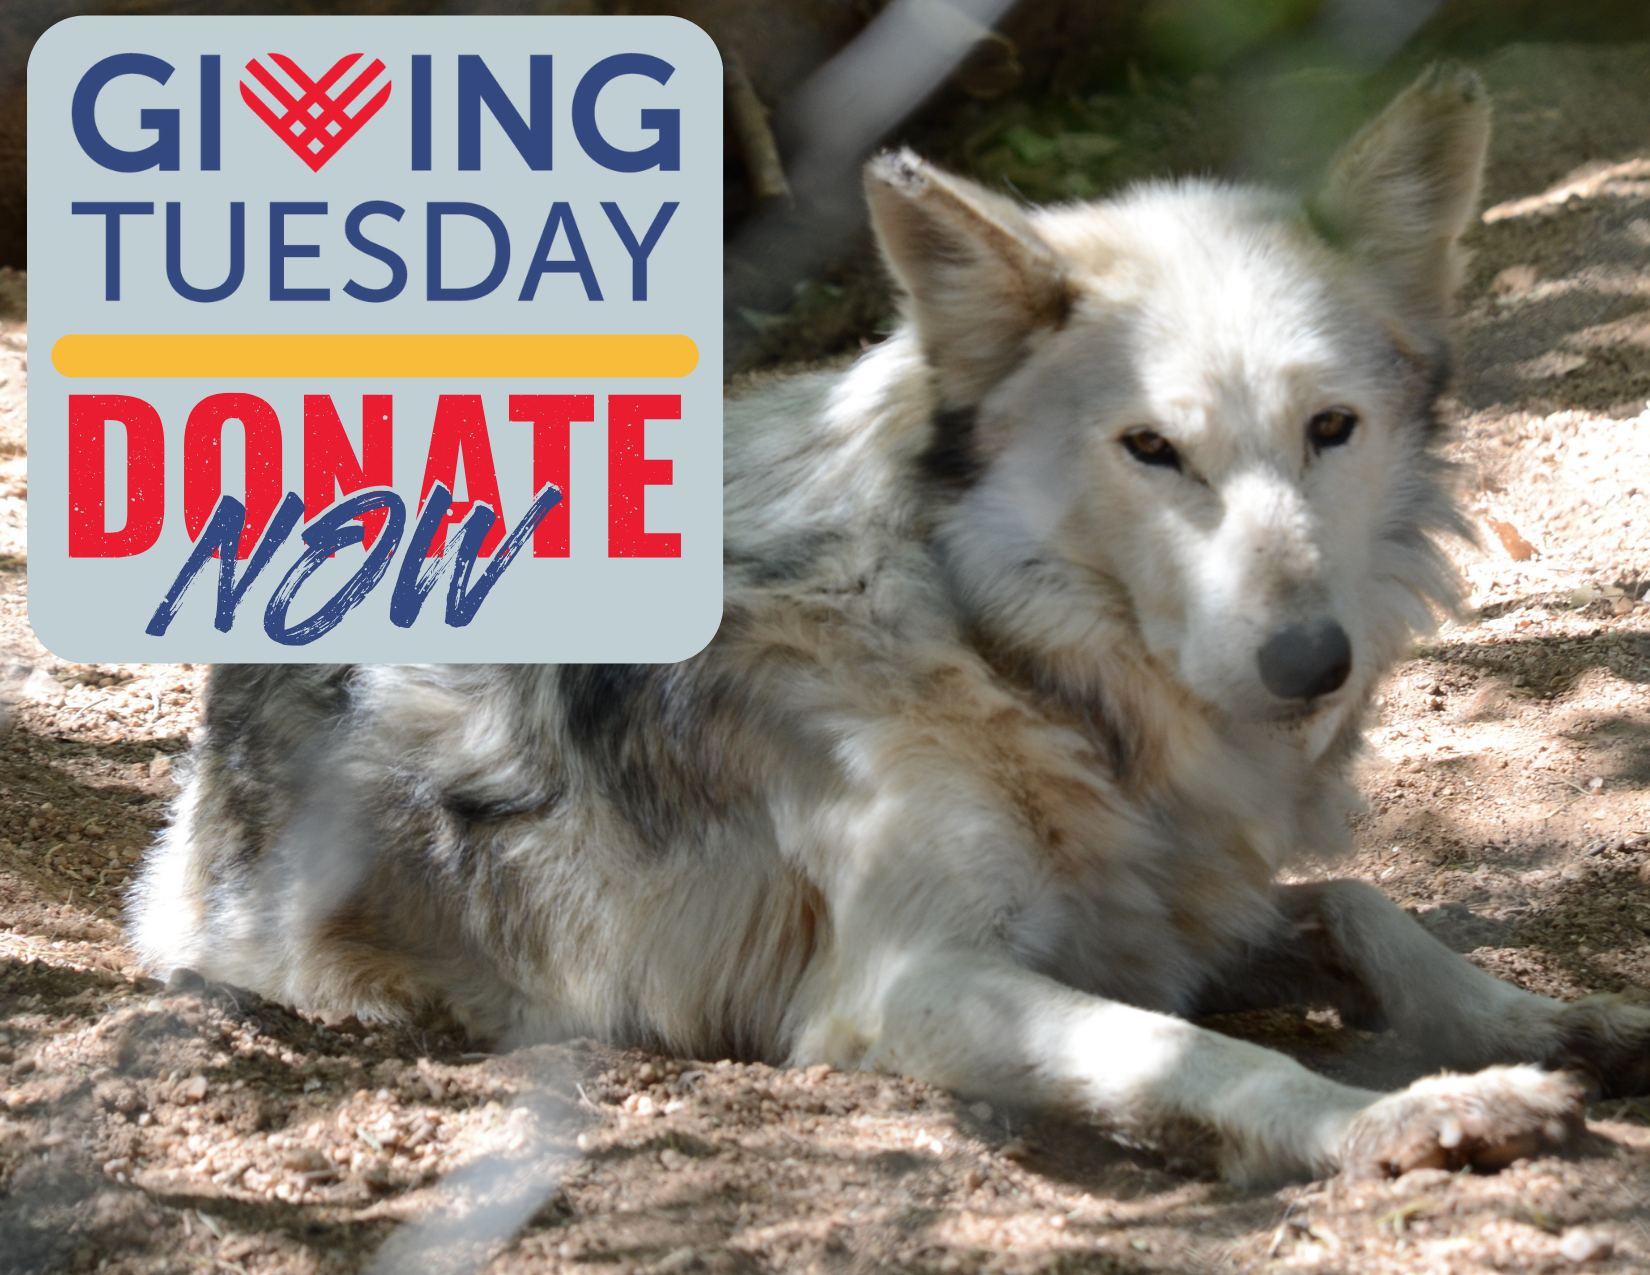 Giving Tuesday donate now